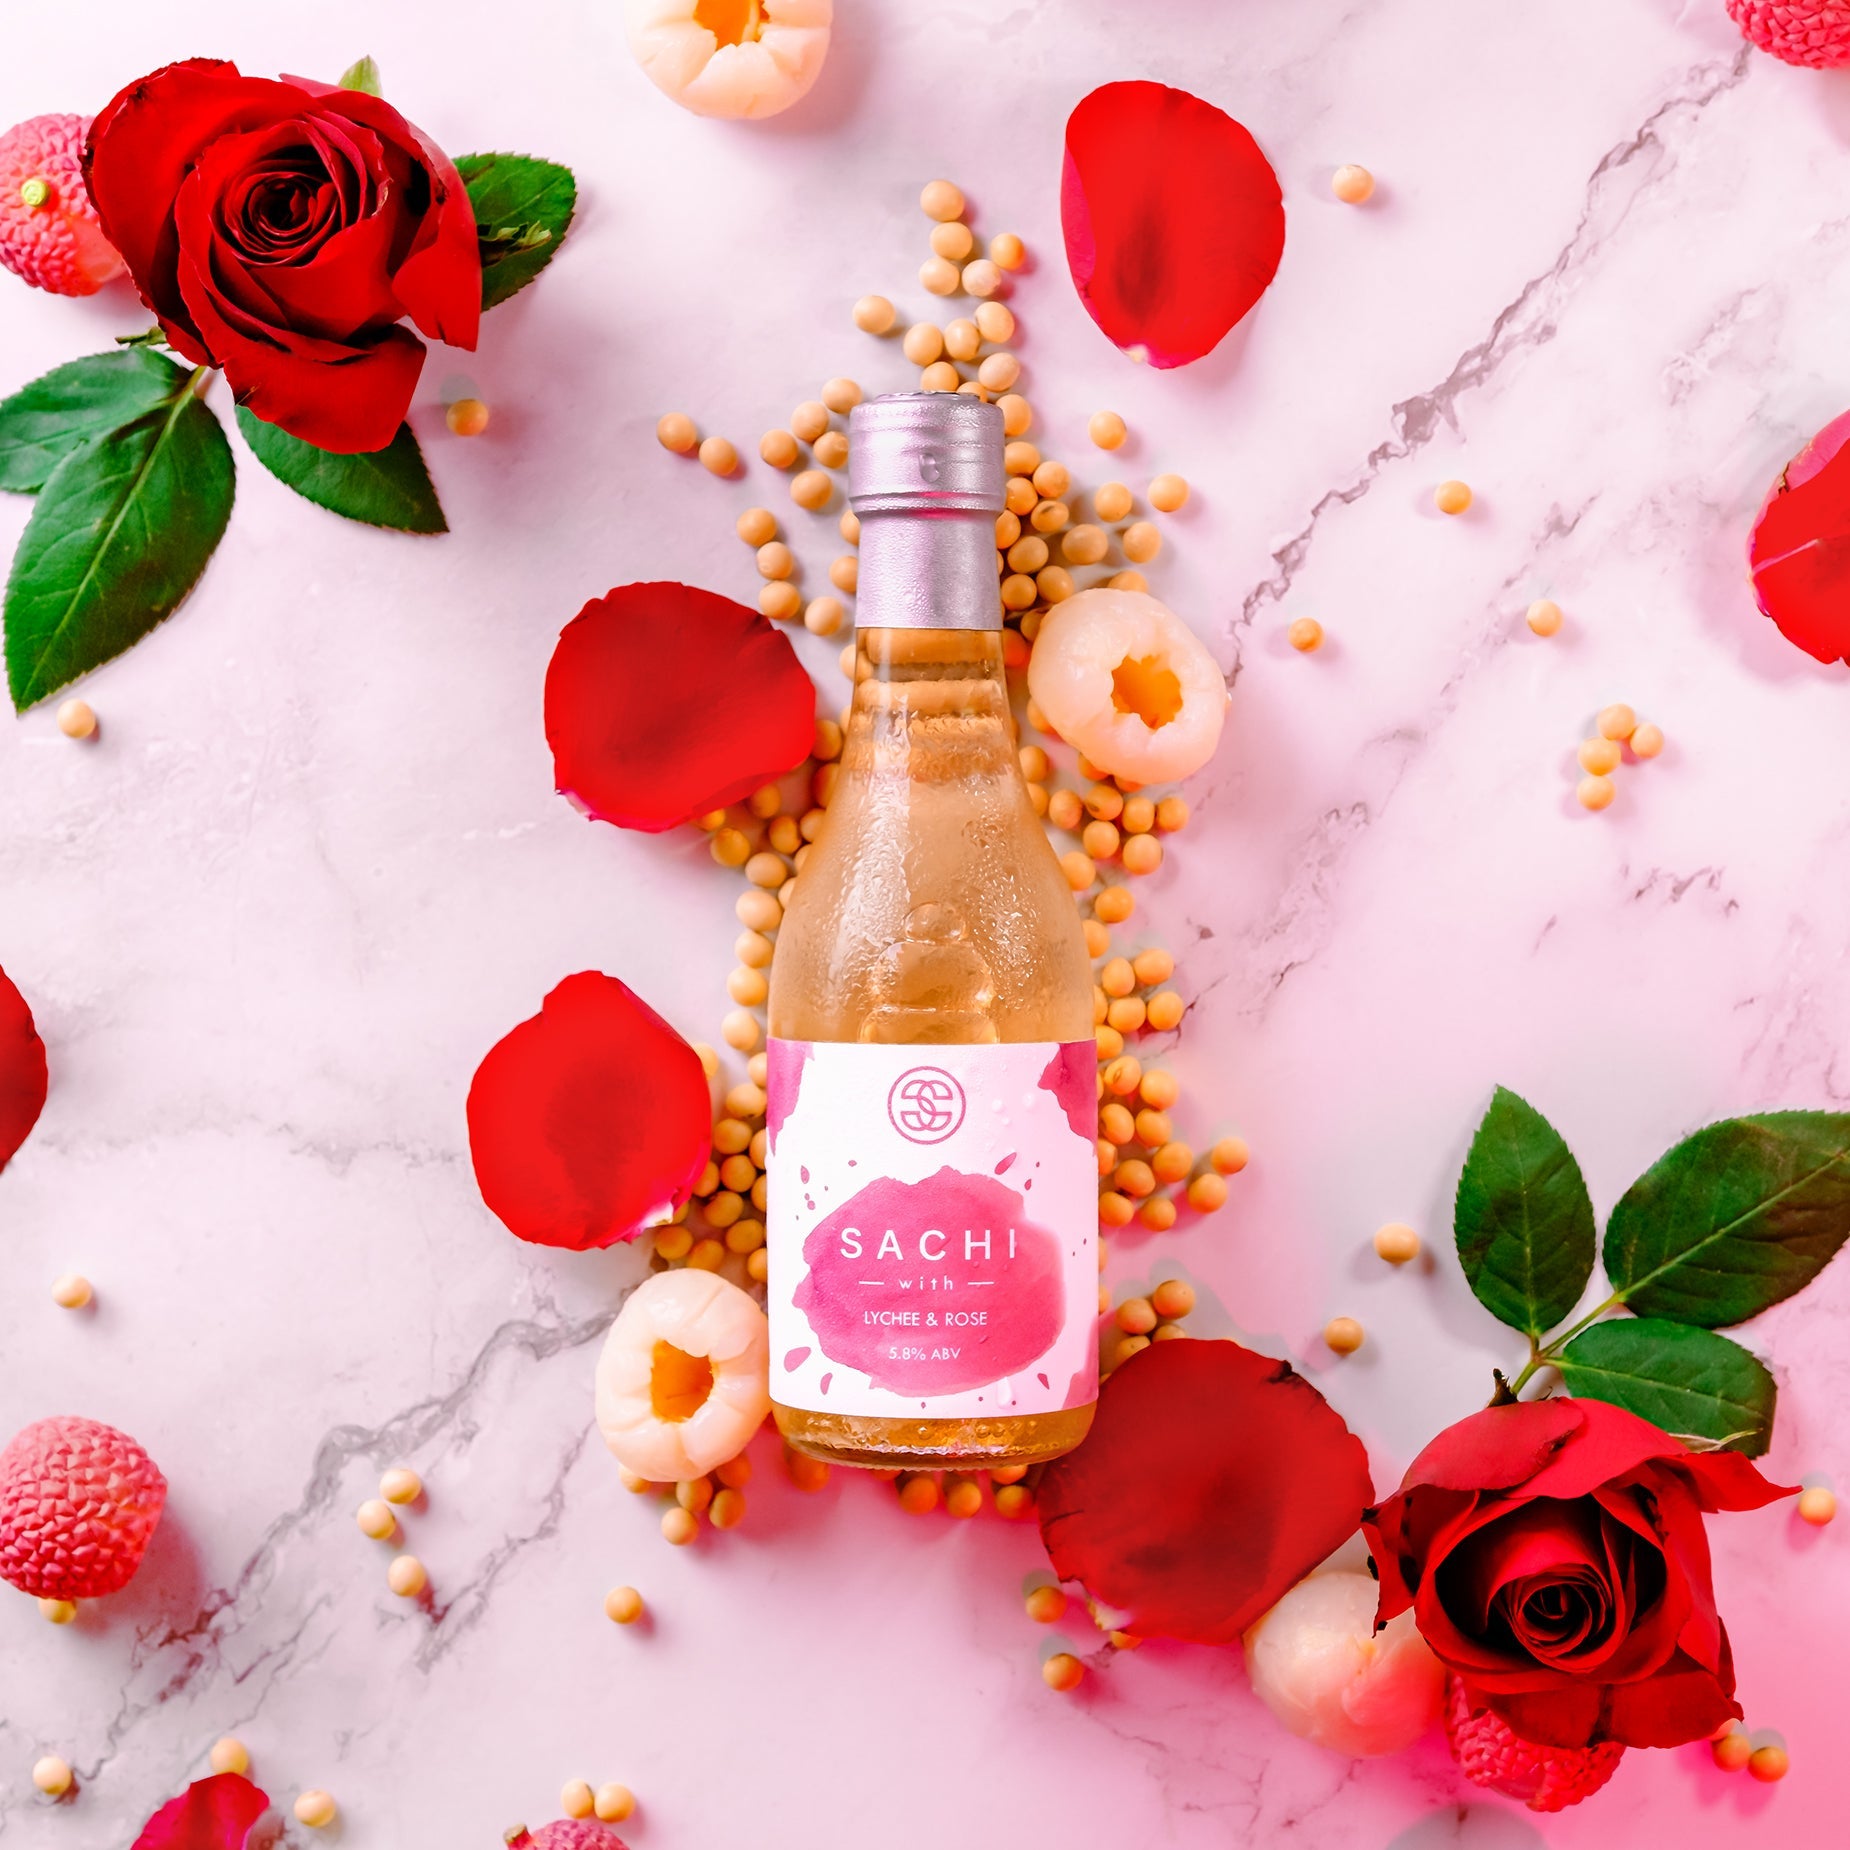 Lychee & Rose by Sinfootech Pte Ltd | Available at The Green Collective